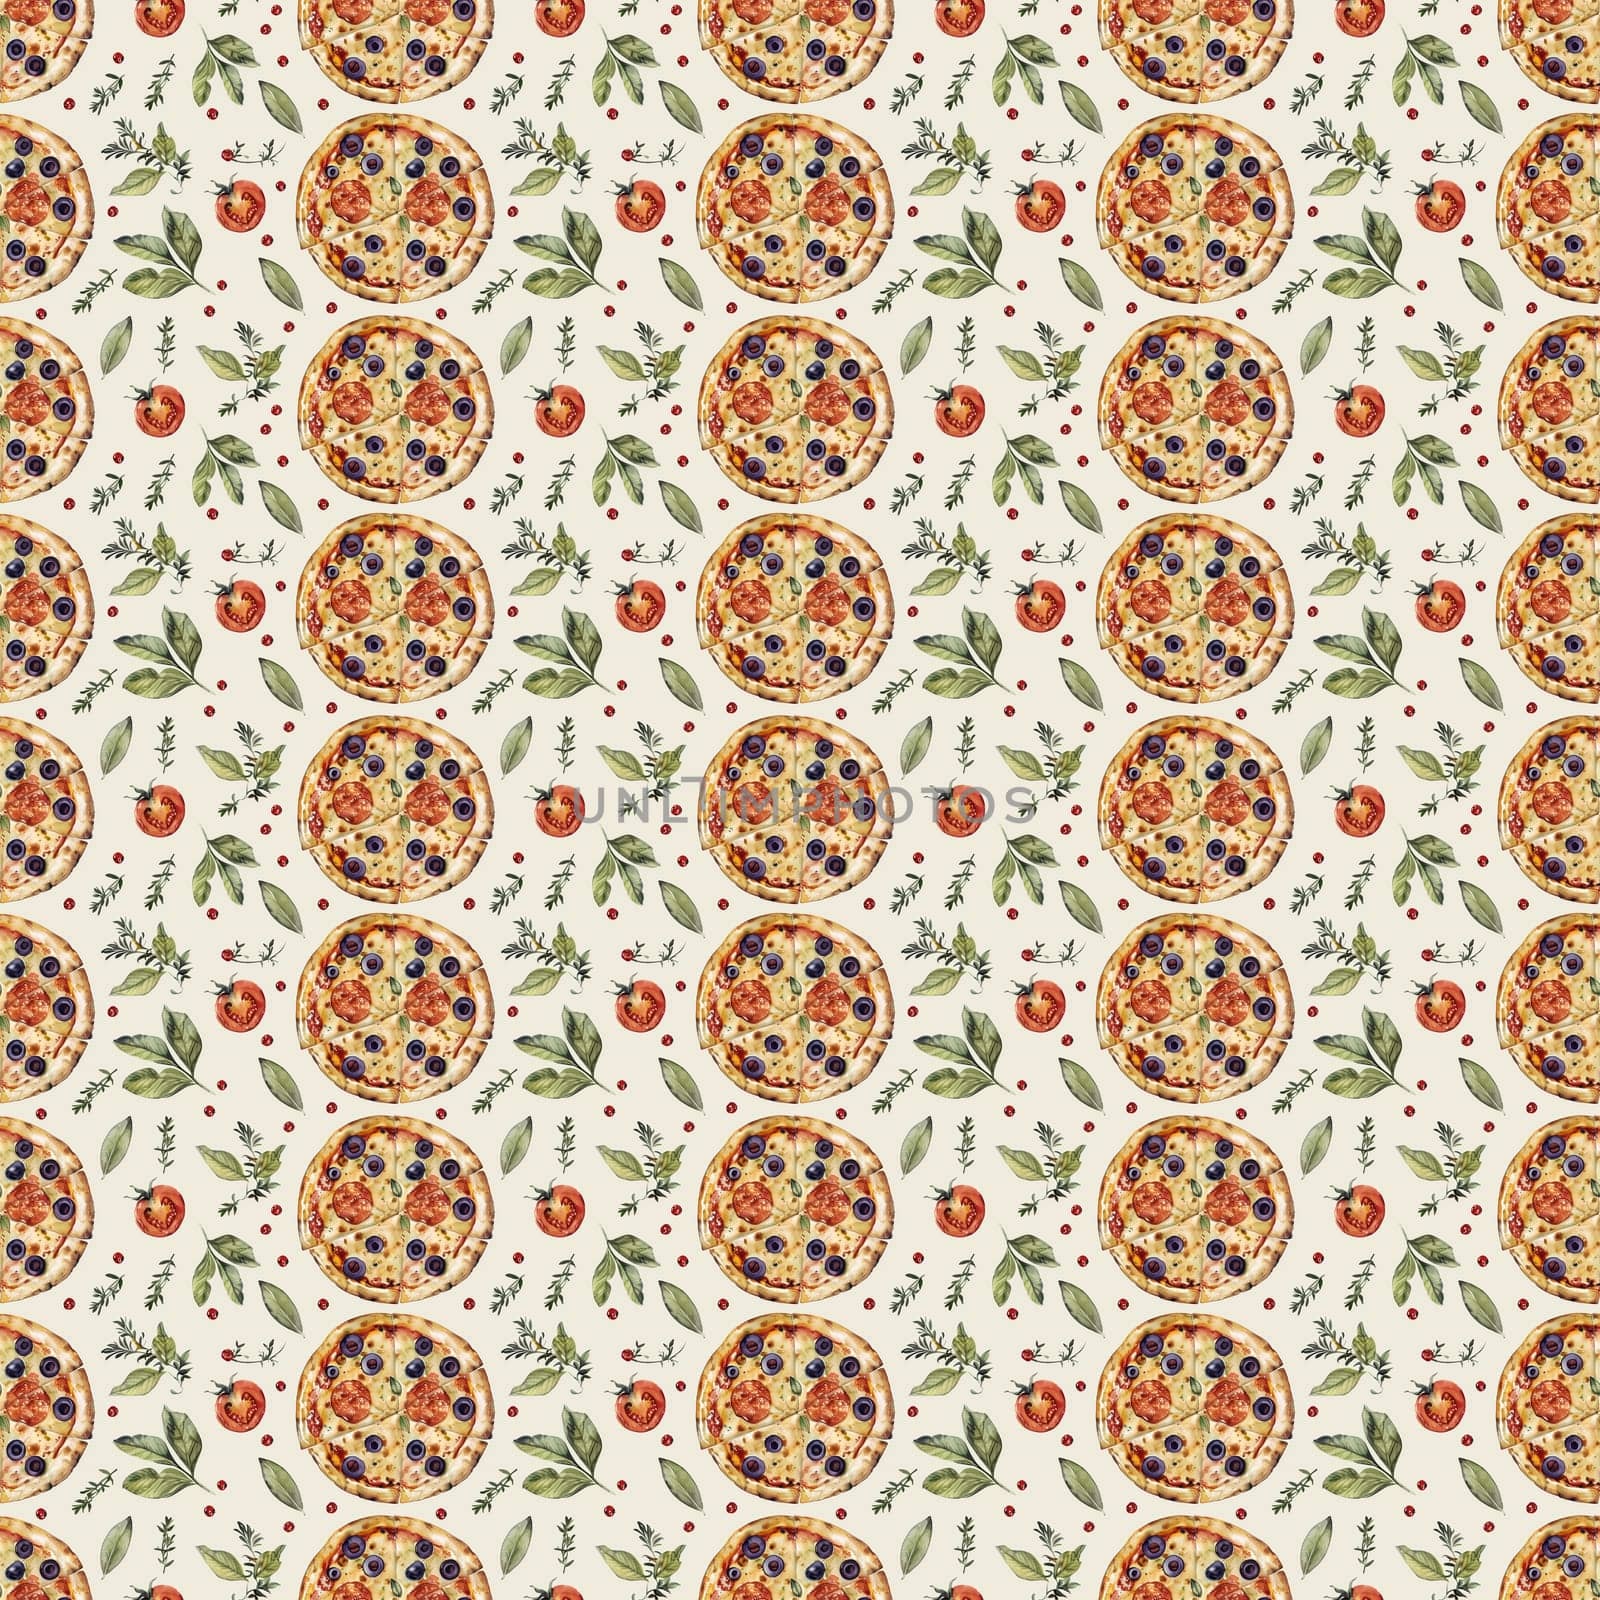 Seamless food pattern featuring whole pizzas, sliced tomatoes, and green basil leaves on light background, perfect for wallpaper or fabric design.